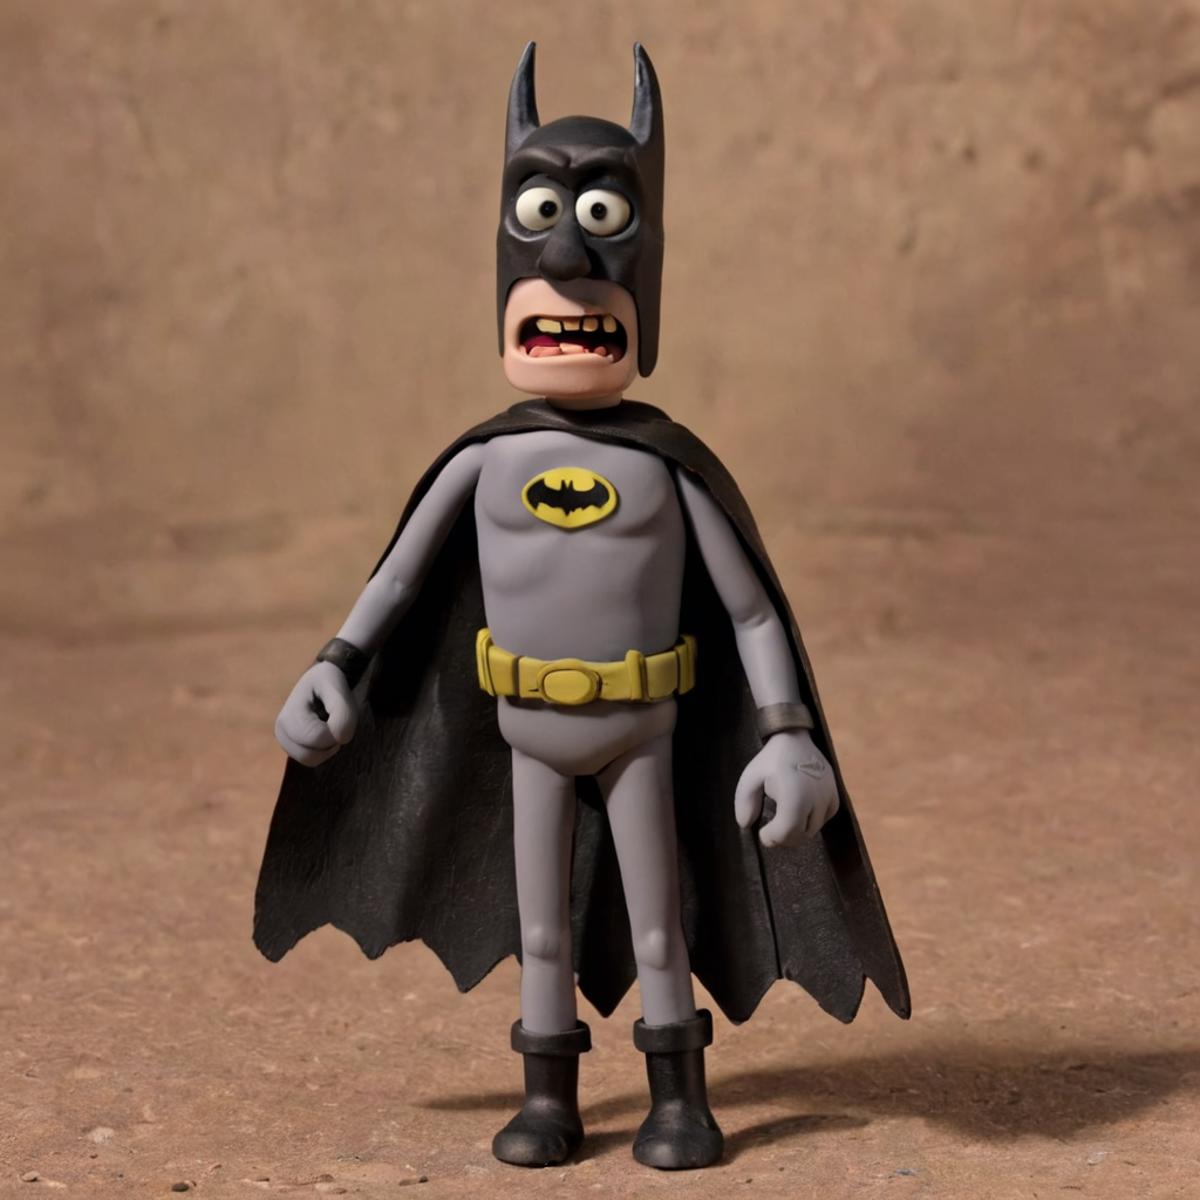 A cartoon version of Batman with a big mouth and wide eyes.